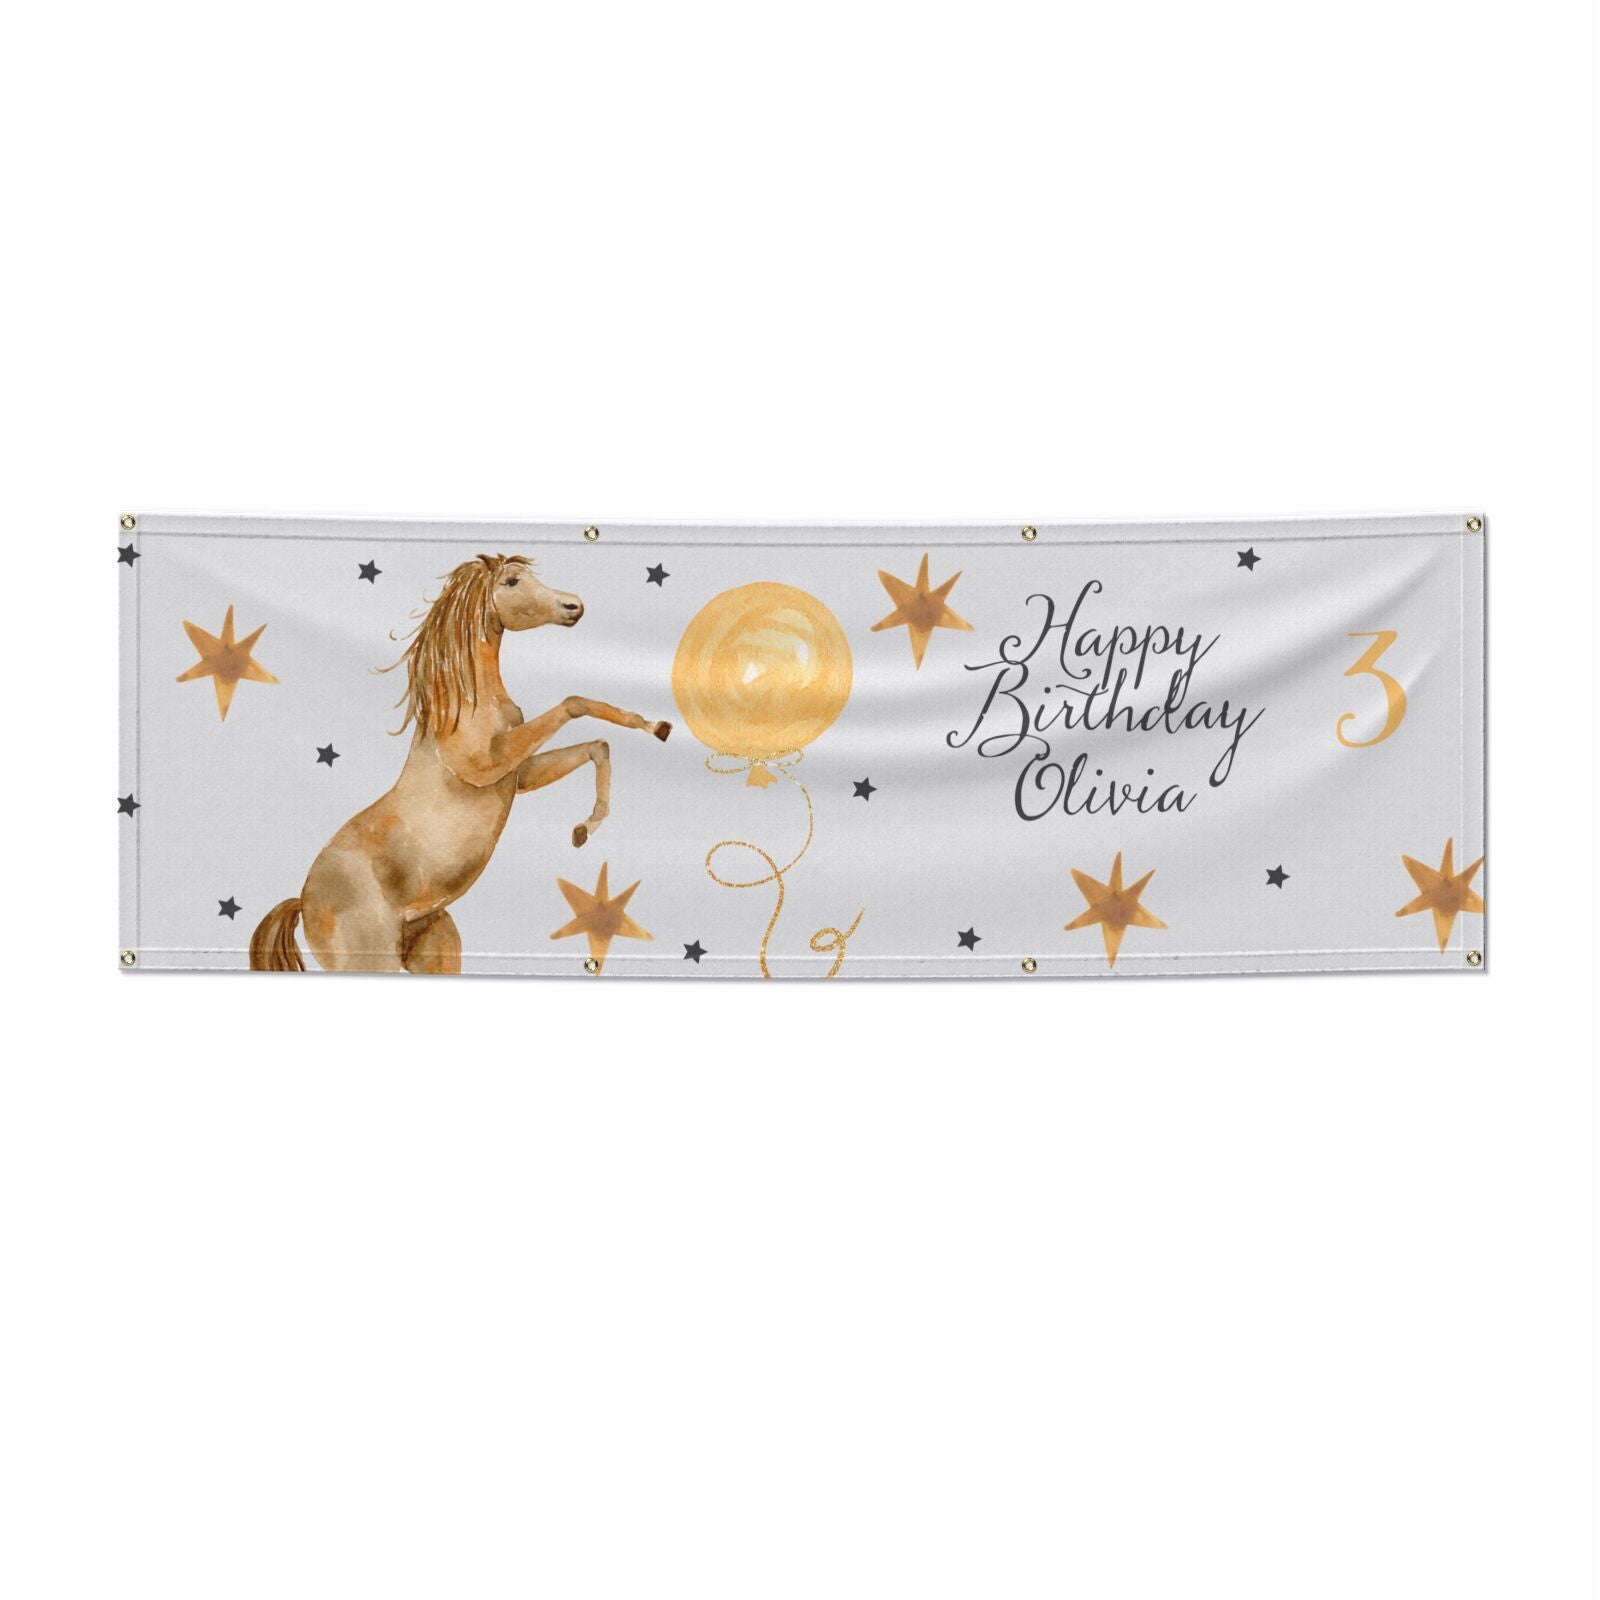 Personalised Horse Happy Birthday 6x2 Vinly Banner with Grommets